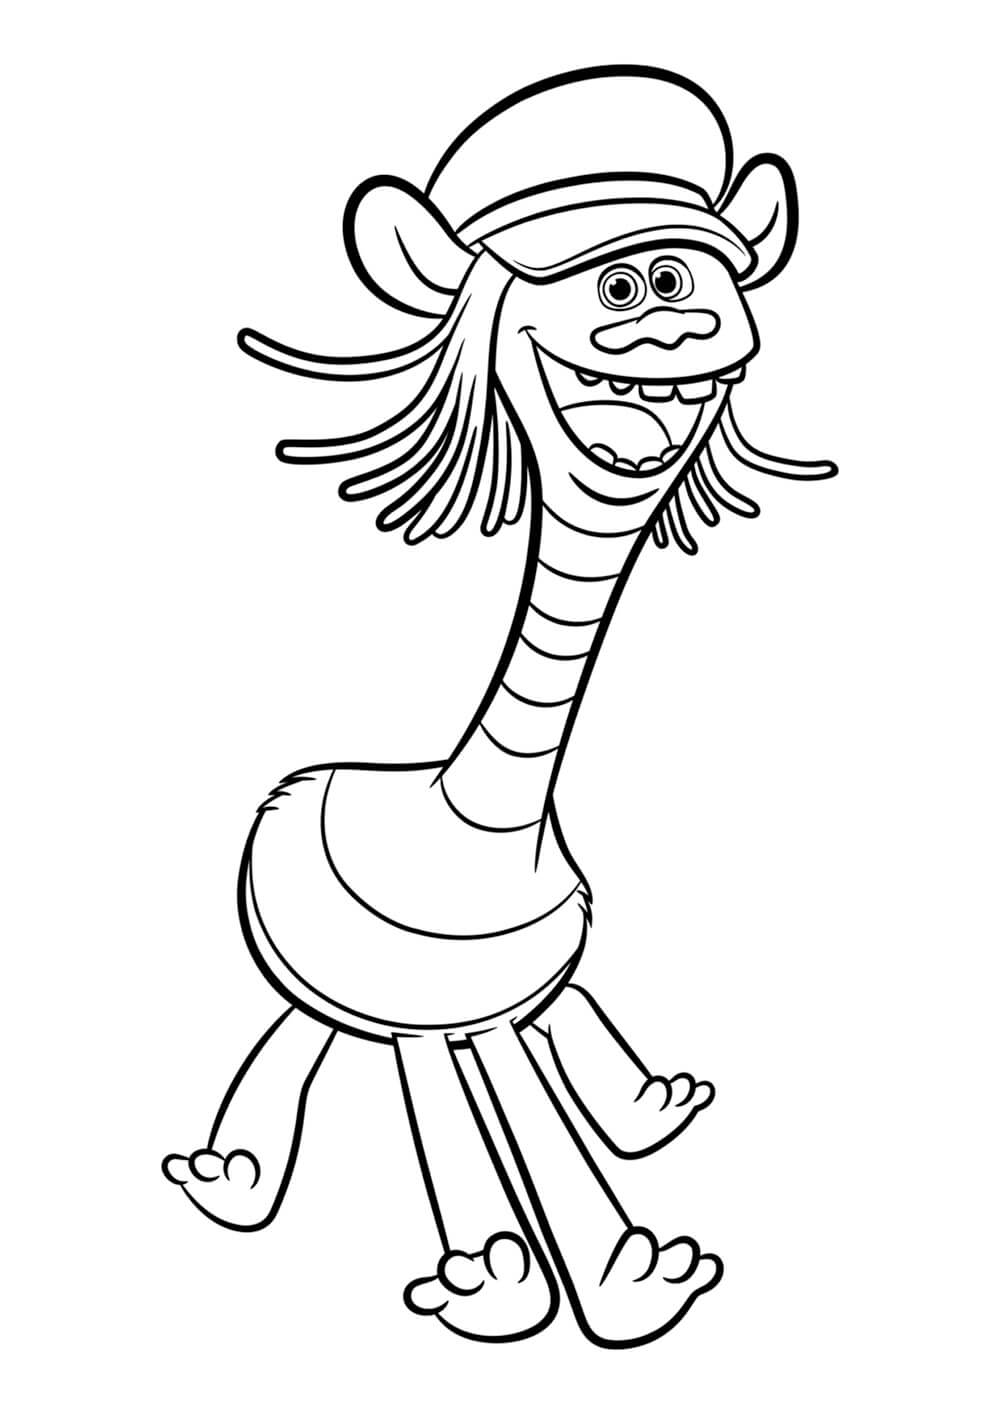 Cooper Trolls Coloring Page